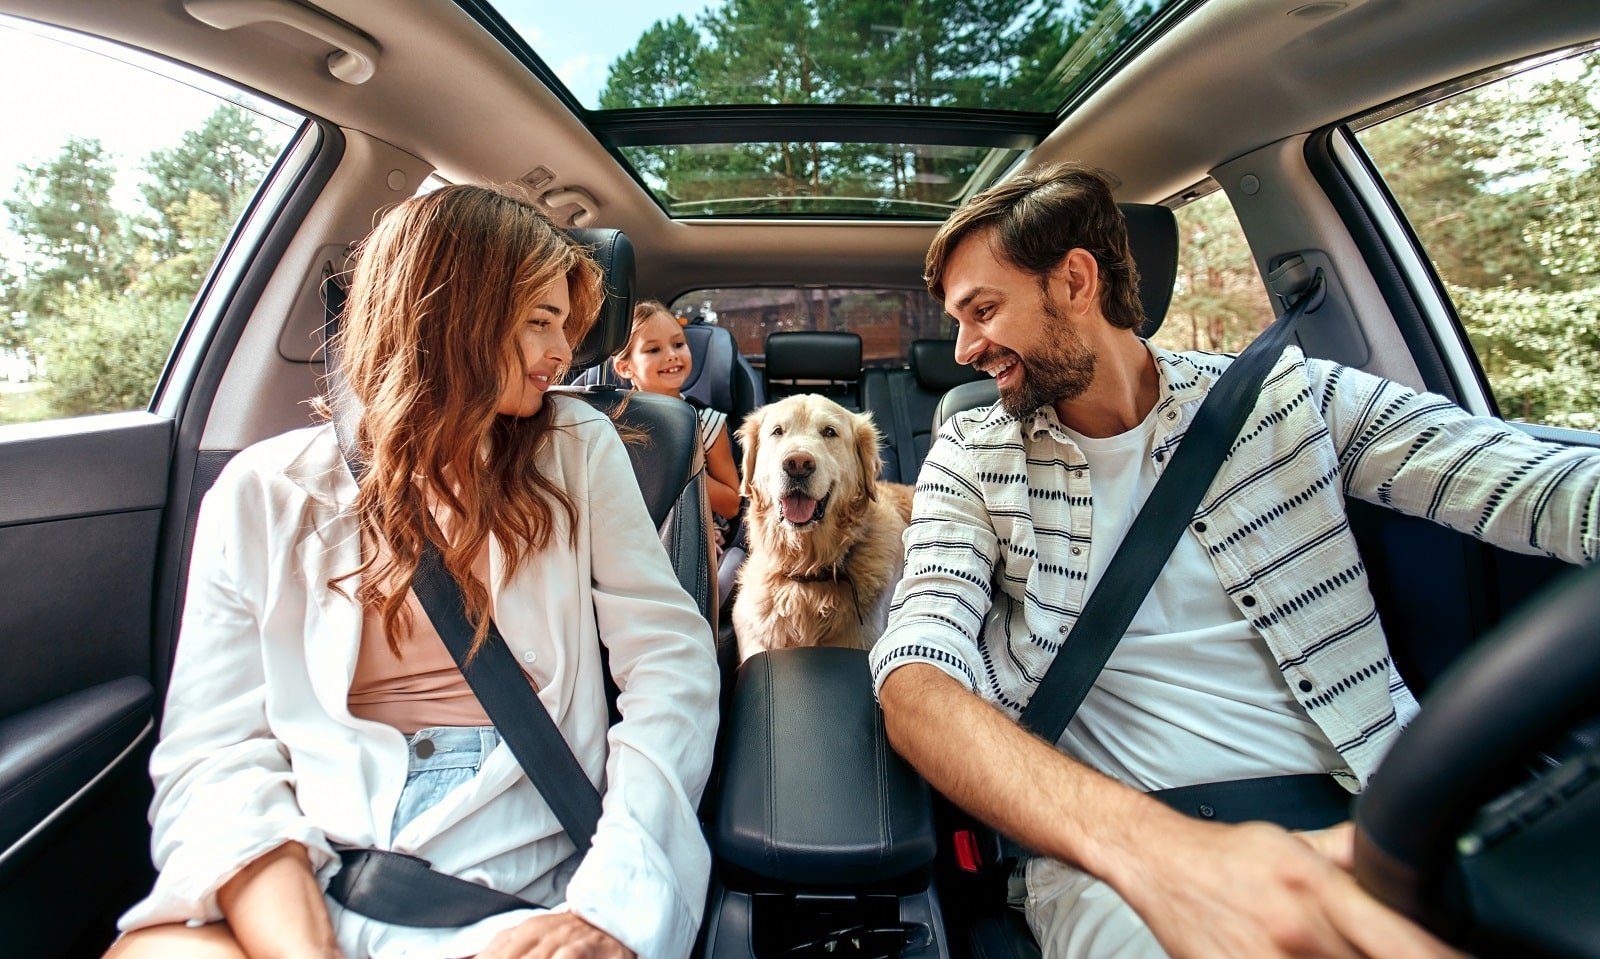 <p><span>Road trips can be a fun and flexible way to travel with pets, but they require planning for frequent stops and pet-friendly accommodations along the way. Ensure your pet is safely secured in the vehicle, either in a carrier or with a pet seatbelt. Plan your route with pet-friendly rest stops, and consider packing a pet travel kit with essentials like food, water, and waste bags.</span></p> <p><b>Insider’s Tip: </b><span>Use pet-friendly travel apps to find hotels, parks, and restaurants along your route that welcome pets.</span></p>